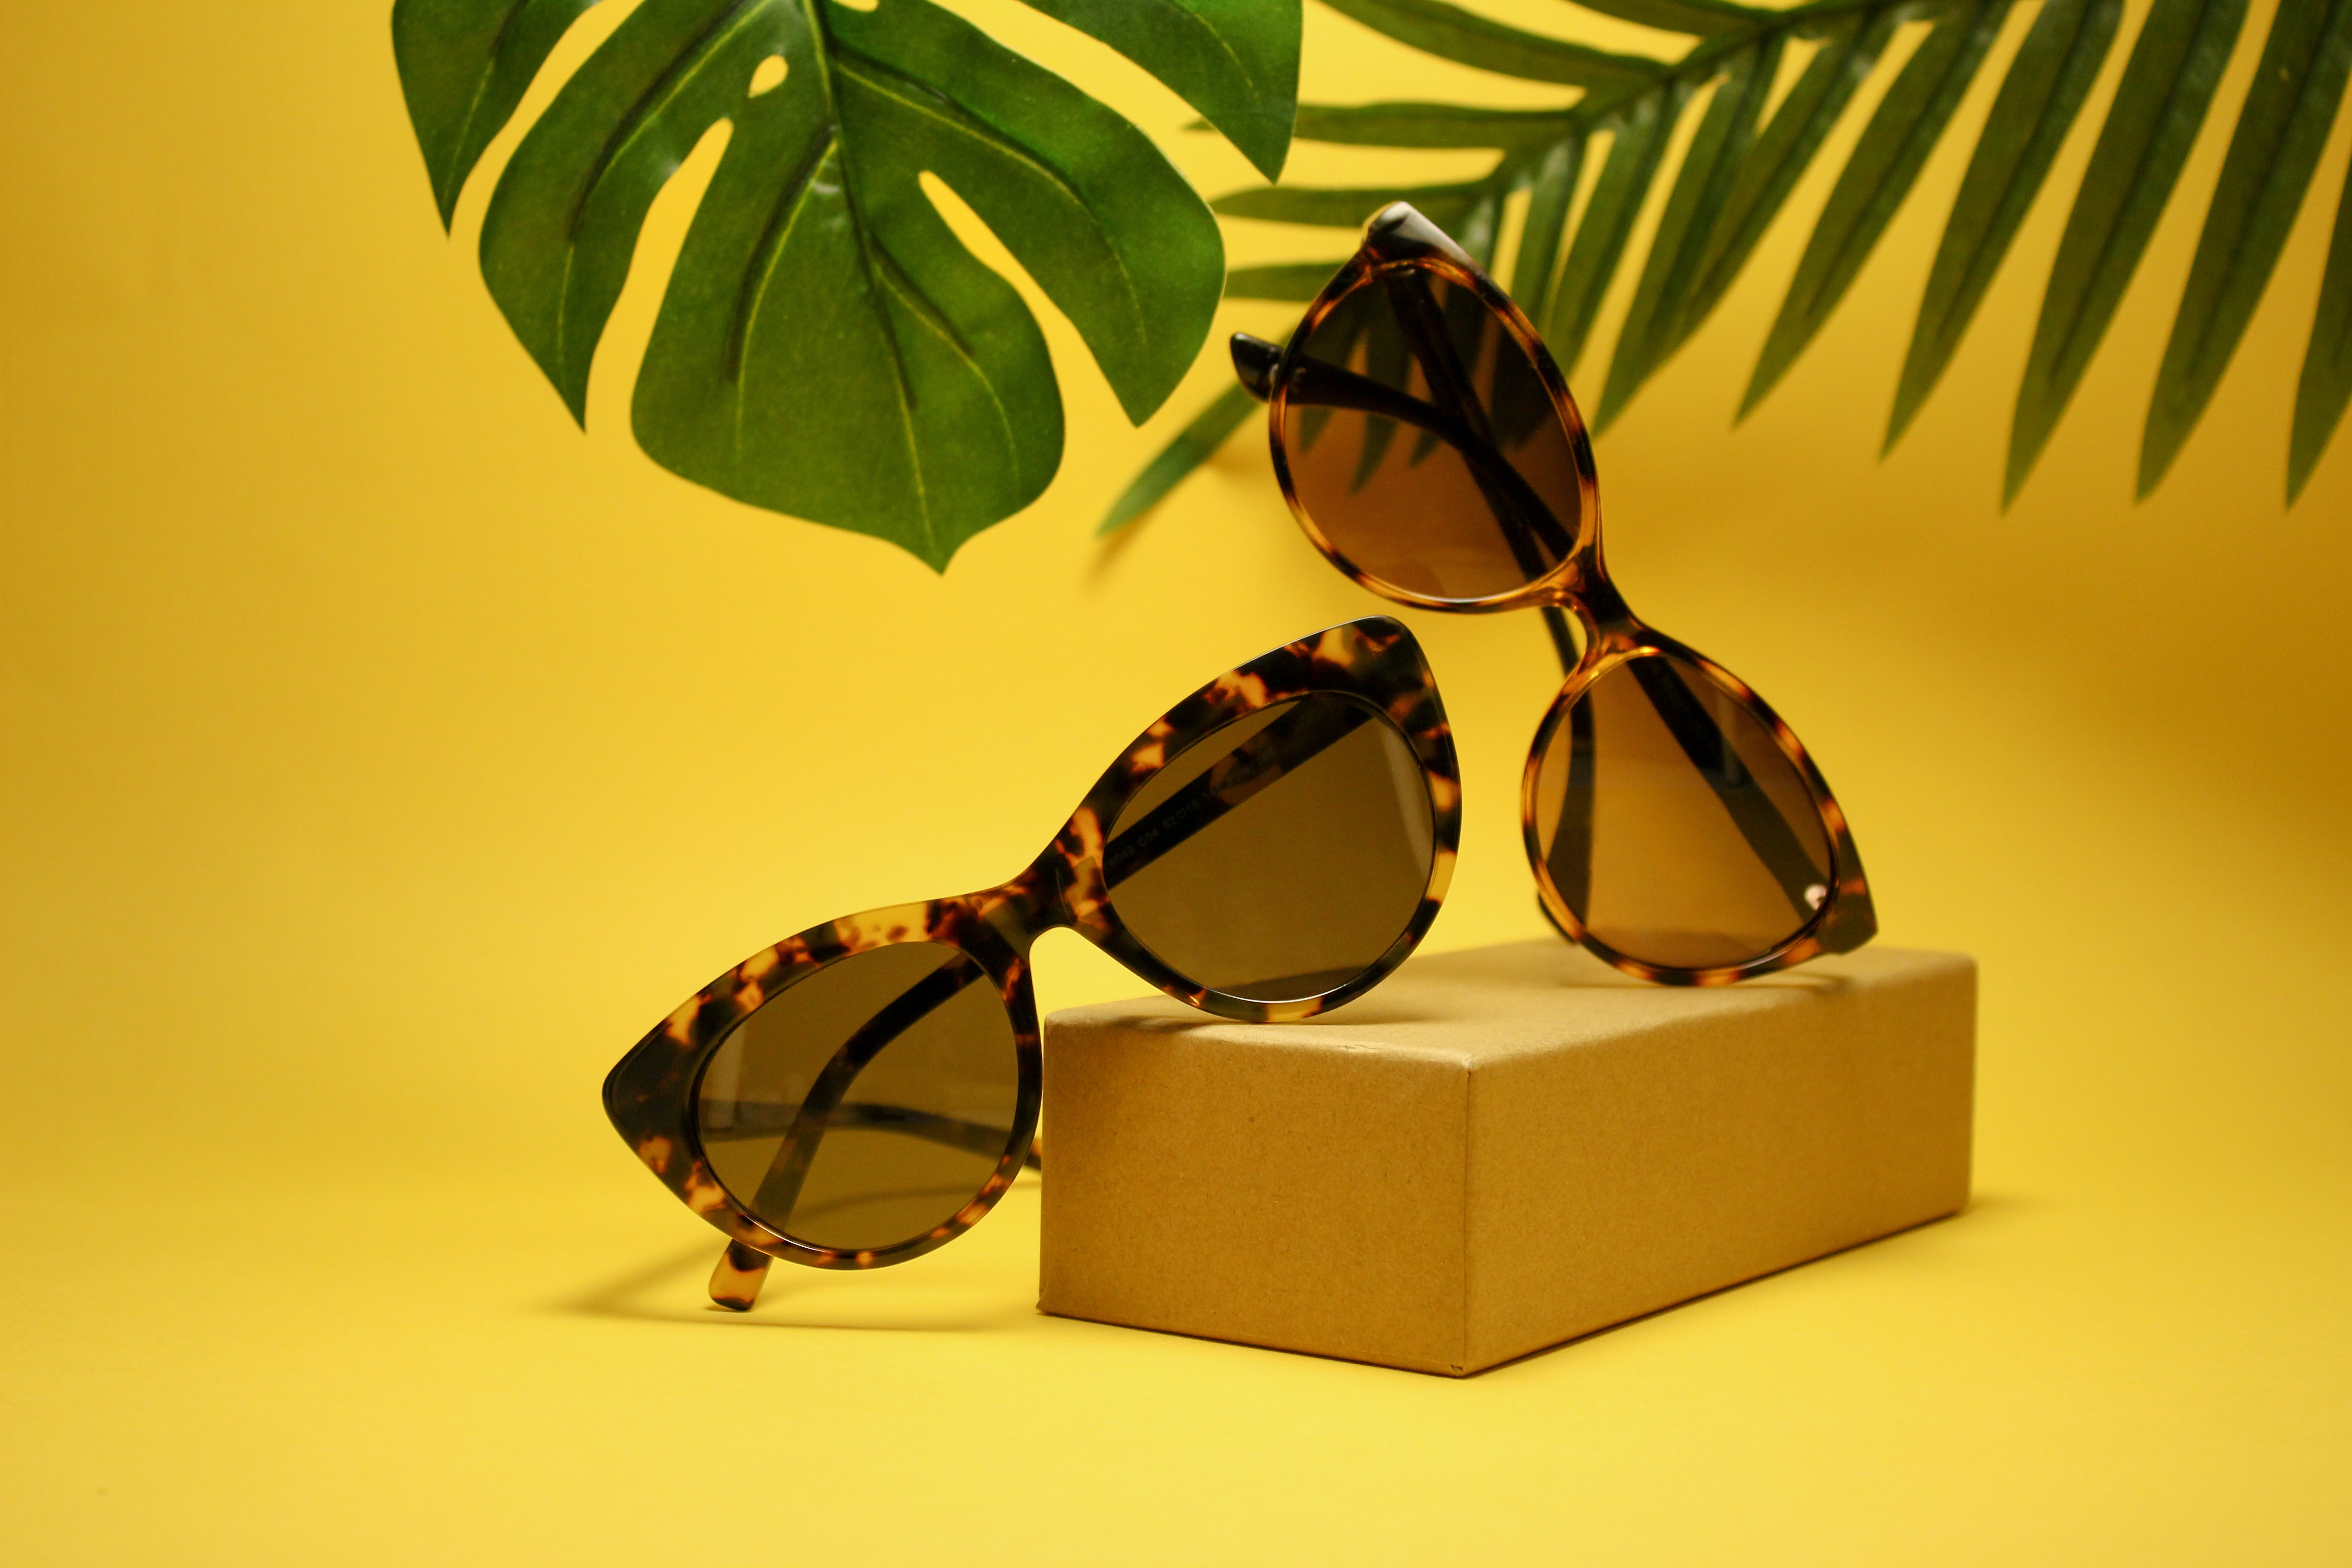 List Of Sunglasses Manufacturers In China: Our Top 7 Picks